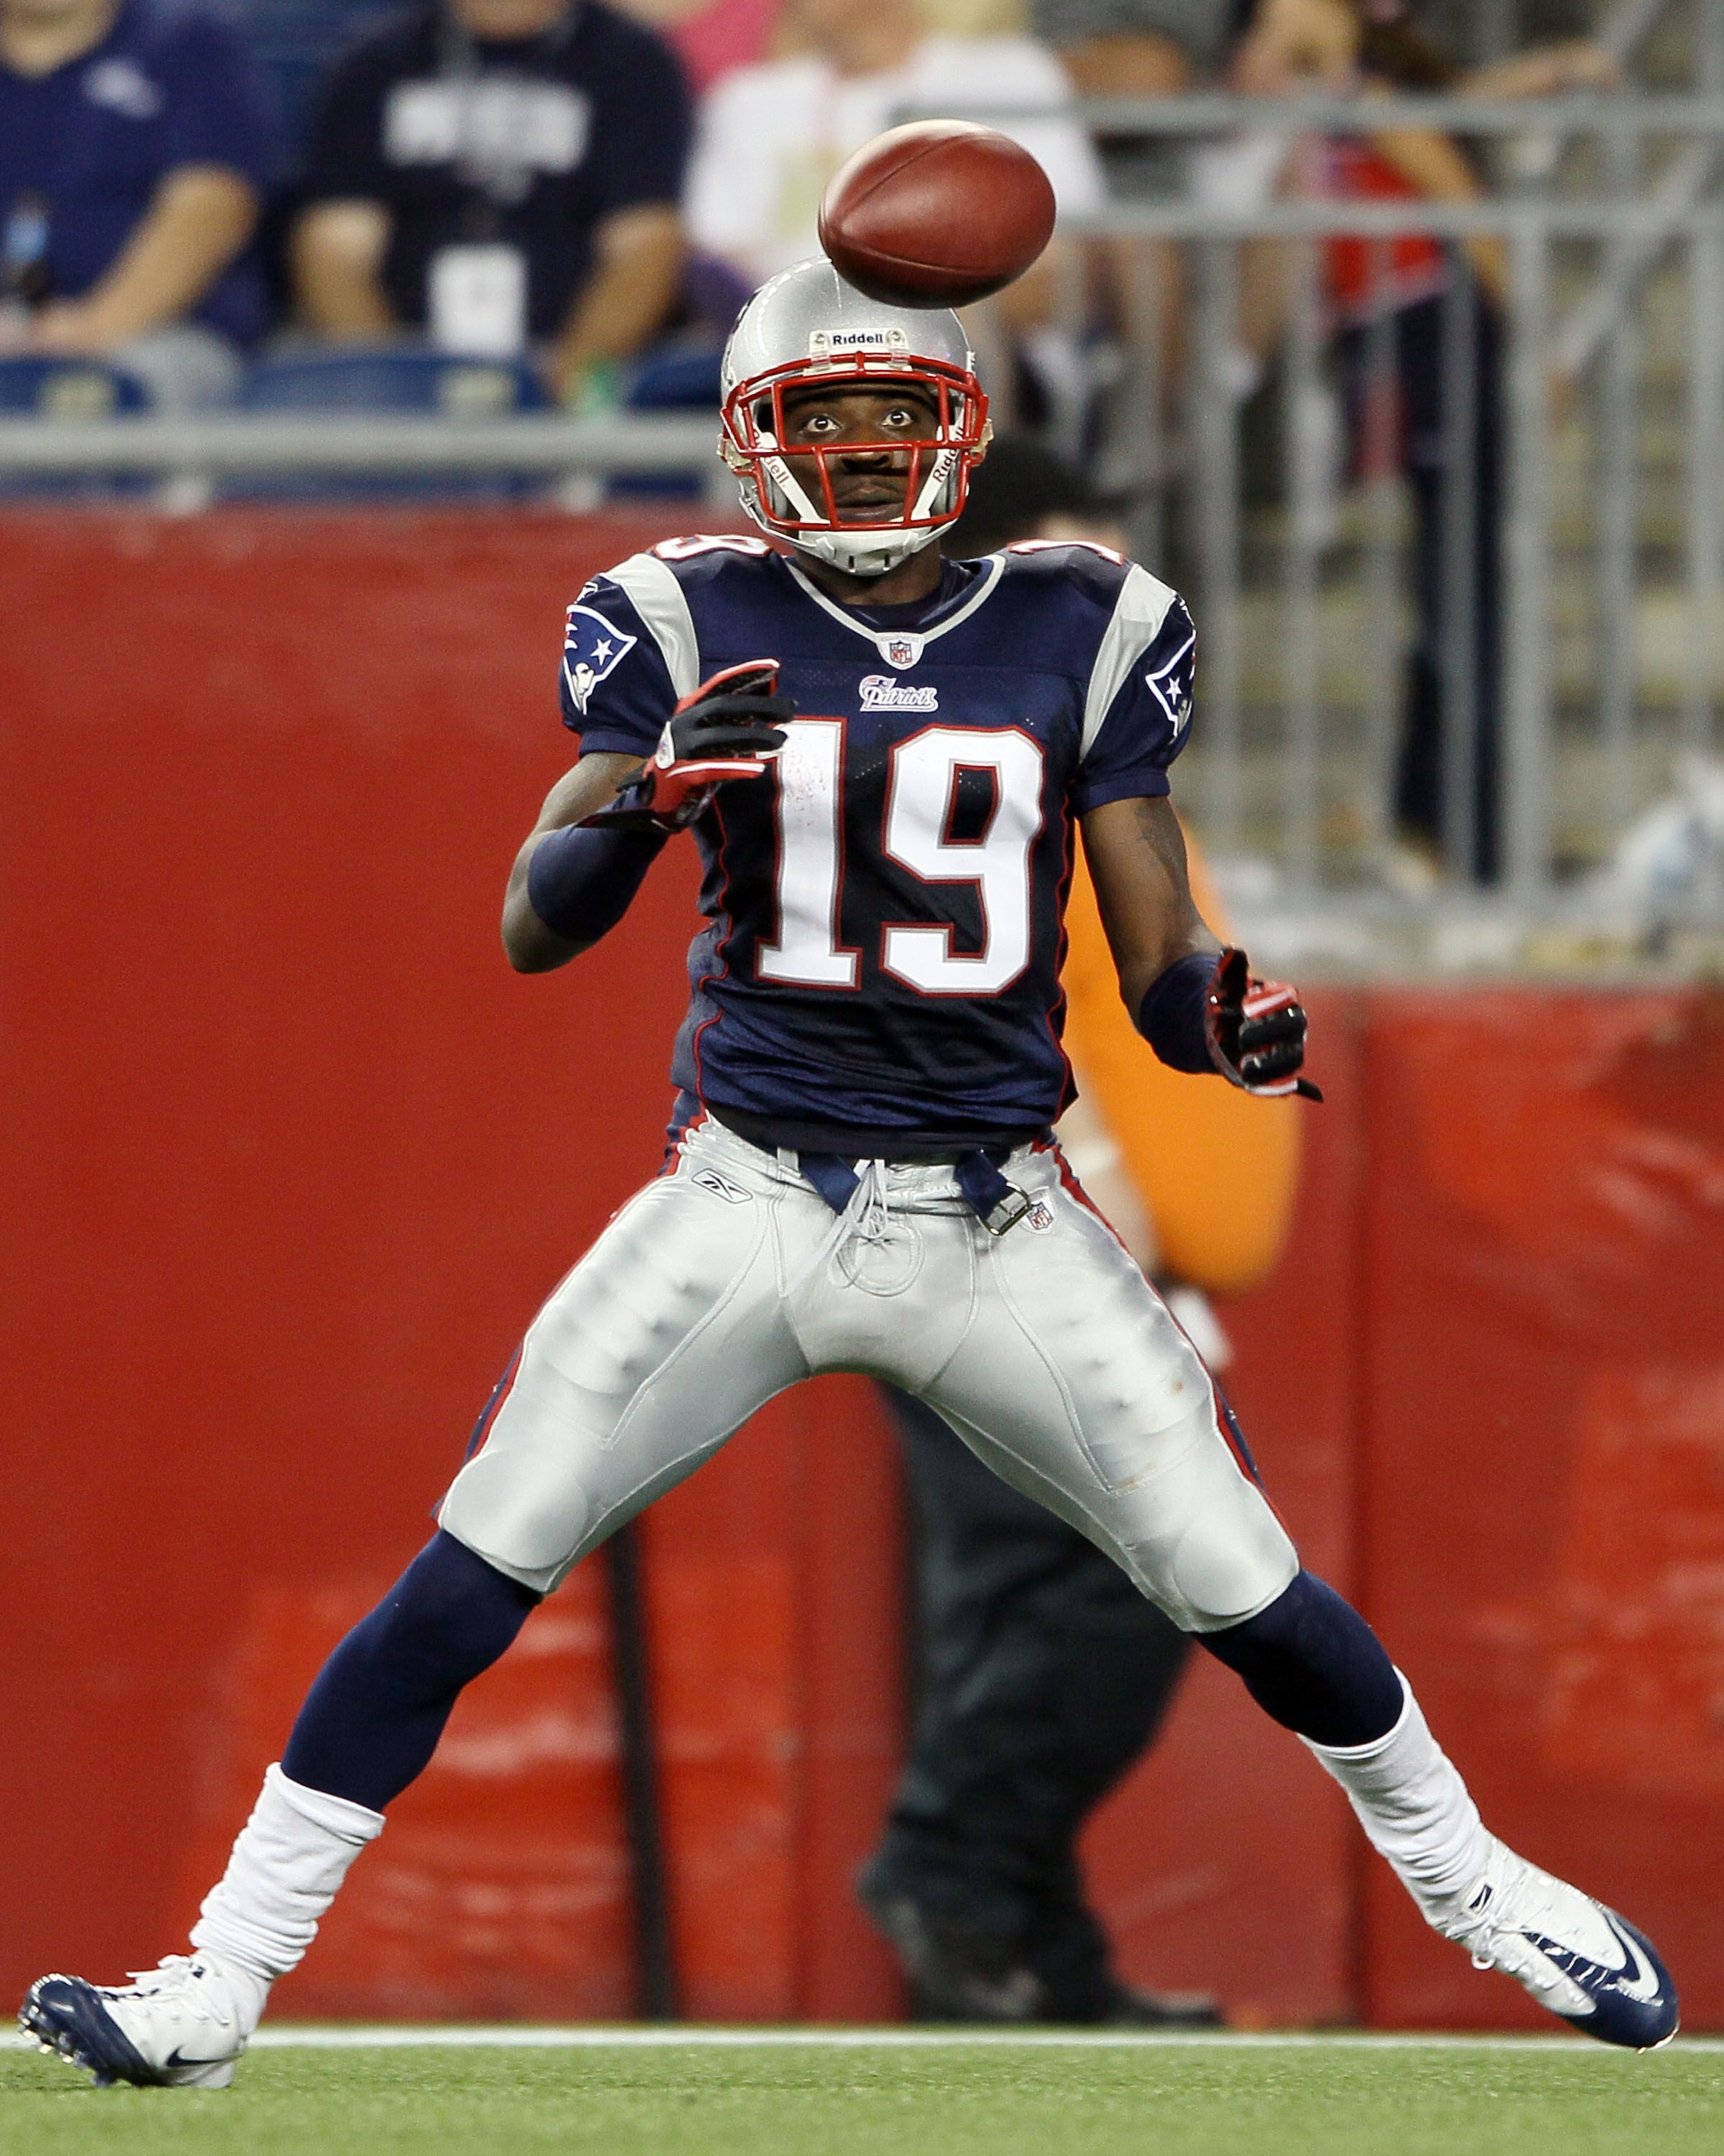 FOXBORO, MA - AUGUST 26:  Brandon Tate #19 of the New England Patriots watches the ball in the first half against the St. Louis Rams on August 26, 2010 at Gillette Stadium in Foxboro, Massachusetts.  (Photo by Elsa/Getty Images)